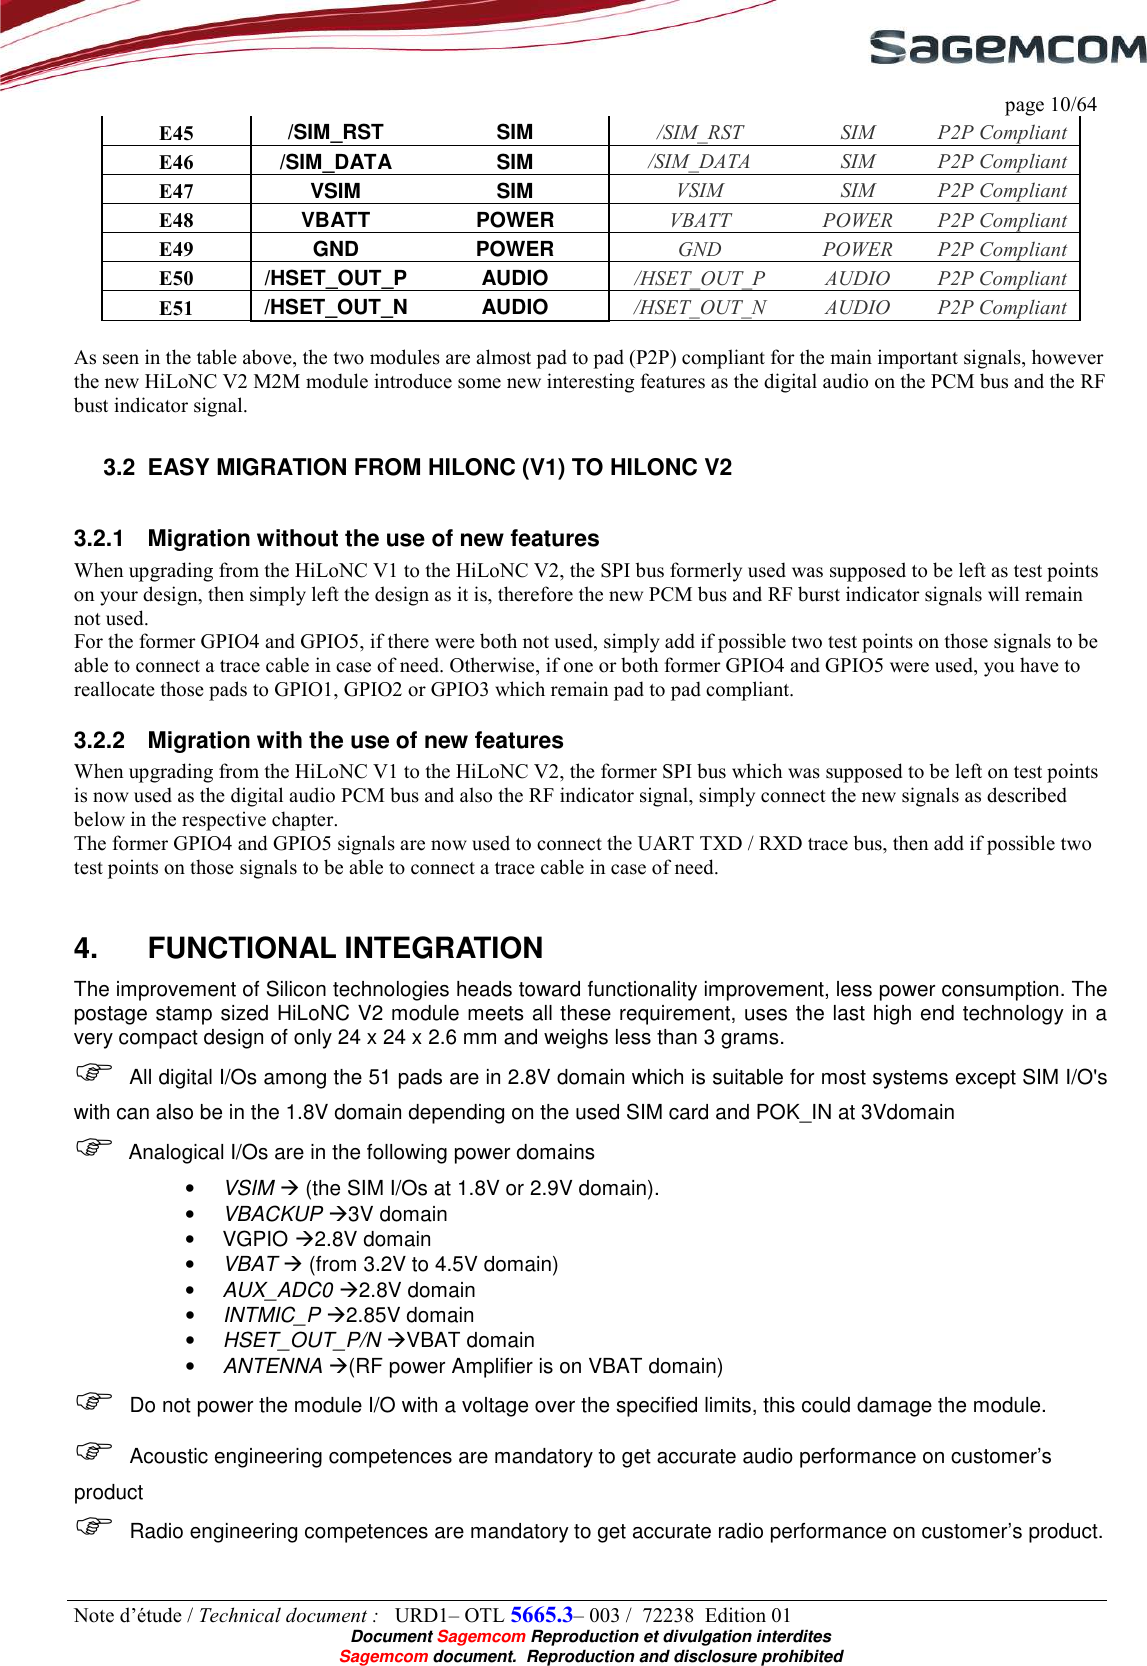     page 10/64 Note d’étude / Technical document :   URD1– OTL 5665.3– 003 /  72238  Edition 01  Document Sagemcom Reproduction et divulgation interdites Sagemcom document.  Reproduction and disclosure prohibited E45  /SIM_RST  SIM  /SIM_RST  SIM  P2P Compliant E46  /SIM_DATA  SIM  /SIM_DATA  SIM  P2P Compliant E47  VSIM  SIM  VSIM  SIM  P2P Compliant E48  VBATT  POWER  VBATT  POWER  P2P Compliant E49  GND  POWER  GND  POWER  P2P Compliant E50  /HSET_OUT_P  AUDIO  /HSET_OUT_P  AUDIO  P2P Compliant E51  /HSET_OUT_N  AUDIO  /HSET_OUT_N  AUDIO  P2P Compliant  As seen in the table above, the two modules are almost pad to pad (P2P) compliant for the main important signals, however the new HiLoNC V2 M2M module introduce some new interesting features as the digital audio on the PCM bus and the RF bust indicator signal. 3.2  EASY MIGRATION FROM HILONC (V1) TO HILONC V2 3.2.1  Migration without the use of new features  When upgrading from the HiLoNC V1 to the HiLoNC V2, the SPI bus formerly used was supposed to be left as test points on your design, then simply left the design as it is, therefore the new PCM bus and RF burst indicator signals will remain not used. For the former GPIO4 and GPIO5, if there were both not used, simply add if possible two test points on those signals to be able to connect a trace cable in case of need. Otherwise, if one or both former GPIO4 and GPIO5 were used, you have to reallocate those pads to GPIO1, GPIO2 or GPIO3 which remain pad to pad compliant. 3.2.2  Migration with the use of new features  When upgrading from the HiLoNC V1 to the HiLoNC V2, the former SPI bus which was supposed to be left on test points is now used as the digital audio PCM bus and also the RF indicator signal, simply connect the new signals as described below in the respective chapter. The former GPIO4 and GPIO5 signals are now used to connect the UART TXD / RXD trace bus, then add if possible two test points on those signals to be able to connect a trace cable in case of need. 4.  FUNCTIONAL INTEGRATION The improvement of Silicon technologies heads toward functionality improvement, less power consumption. The postage stamp sized HiLoNC V2 module meets all these requirement, uses the last high end technology in a very compact design of only 24 x 24 x 2.6 mm and weighs less than 3 grams.    All digital I/Os among the 51 pads are in 2.8V domain which is suitable for most systems except SIM I/O&apos;s with can also be in the 1.8V domain depending on the used SIM card and POK_IN at 3Vdomain   Analogical I/Os are in the following power domains • VSIM  (the SIM I/Os at 1.8V or 2.9V domain). • VBACKUP 3V domain •  VGPIO 2.8V domain • VBAT  (from 3.2V to 4.5V domain) • AUX_ADC0 2.8V domain • INTMIC_P 2.85V domain • HSET_OUT_P/N VBAT domain • ANTENNA (RF power Amplifier is on VBAT domain)  Do not power the module I/O with a voltage over the specified limits, this could damage the module.  Acoustic engineering competences are mandatory to get accurate audio performance on customer’s product  Radio engineering competences are mandatory to get accurate radio performance on customer’s product. 